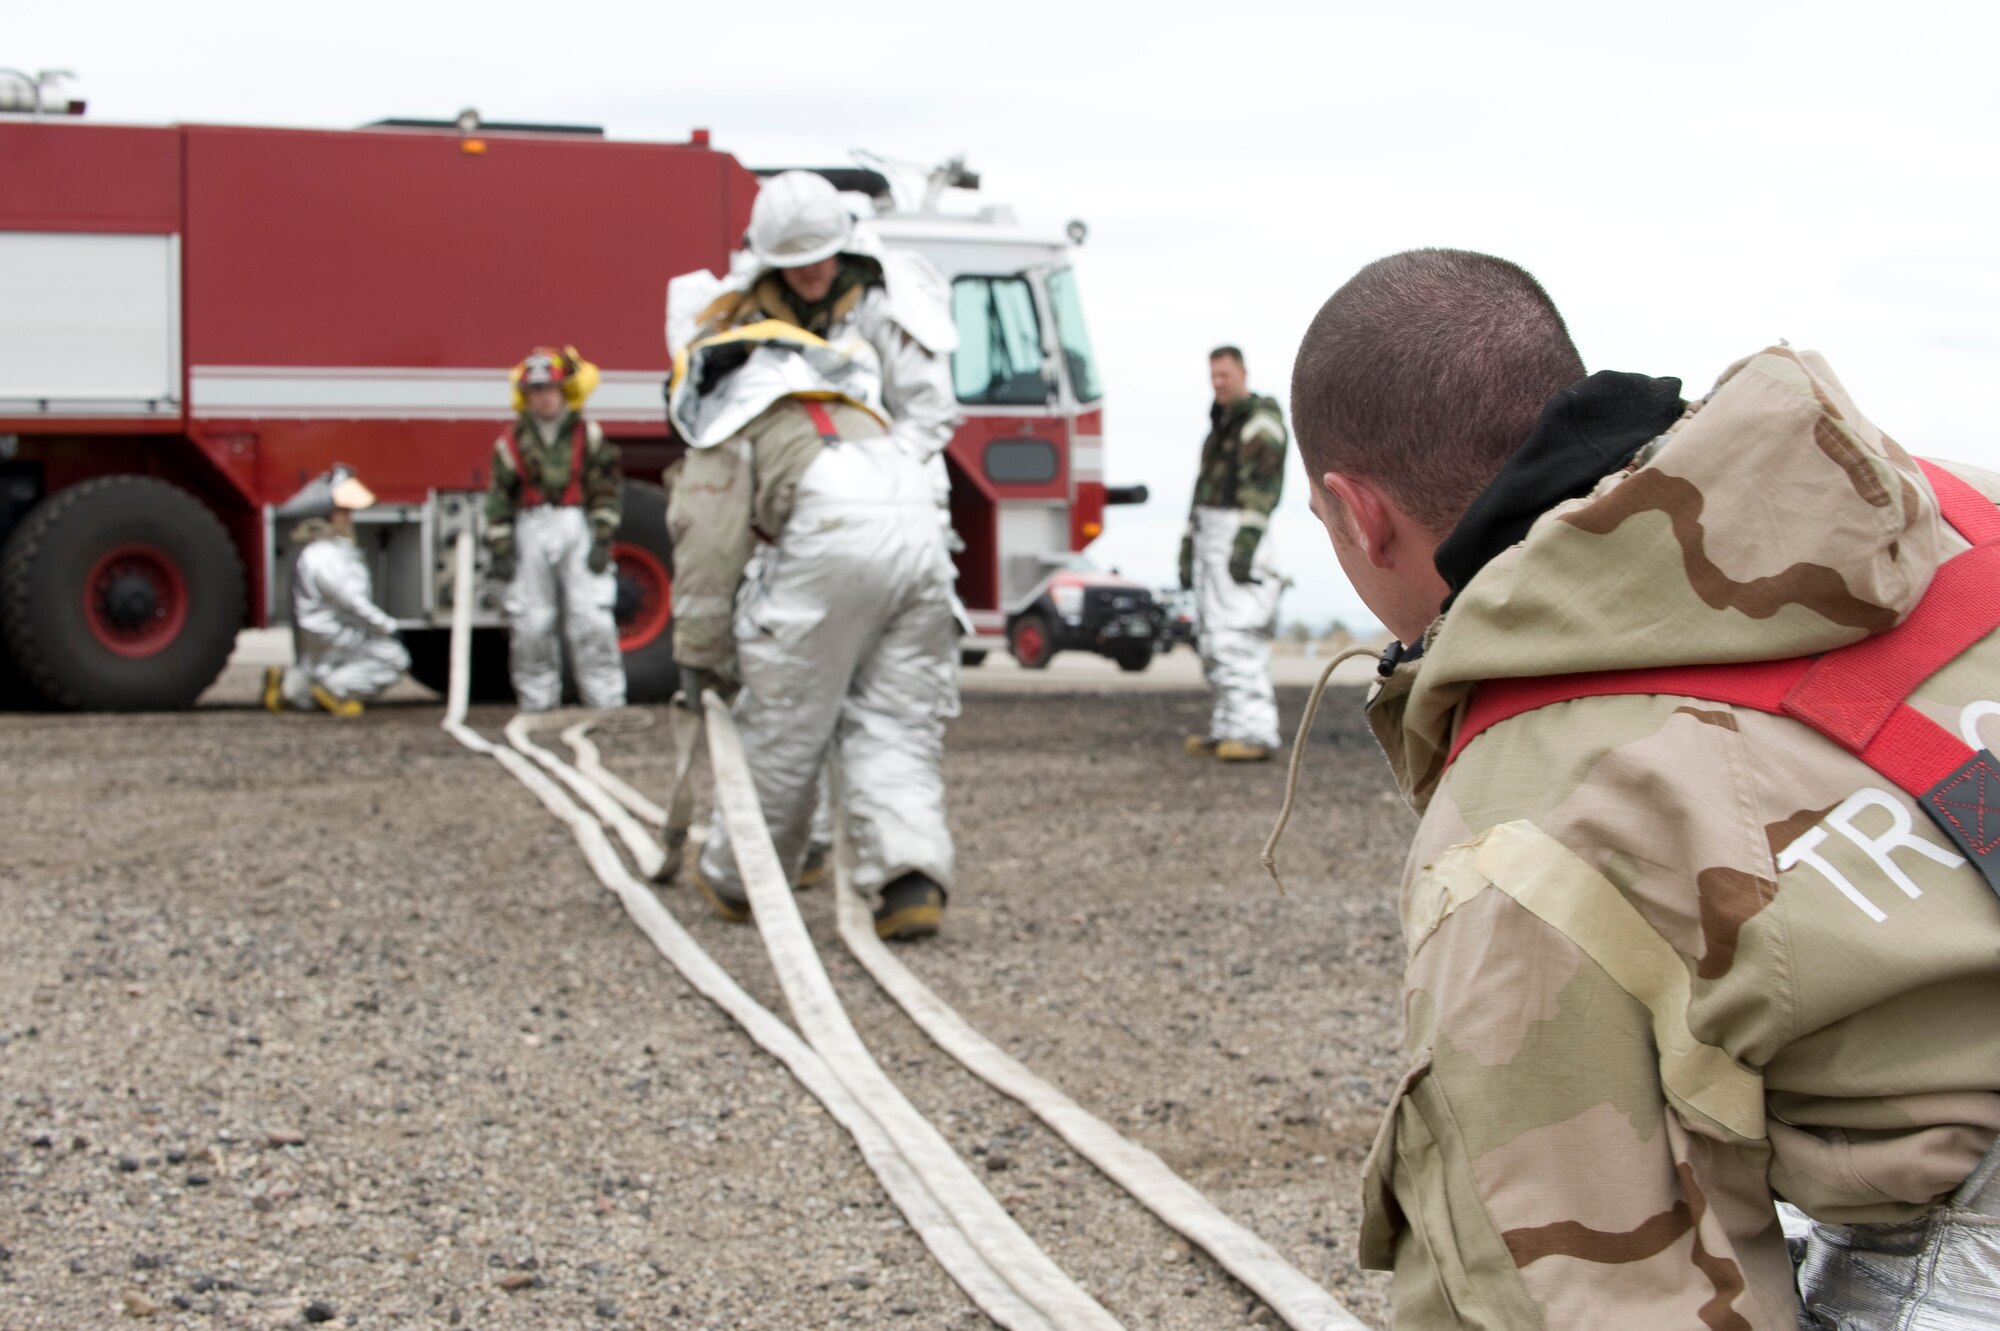 Firefighters put hoses away after a live-fire exercise at Mountain Home Air Force Base, Idaho, April 10, 2013. The firefighters worked together and demonstrated their mission-readiness. (U.S. Air Force Photo/Airman 1st Class Malissa Lott)